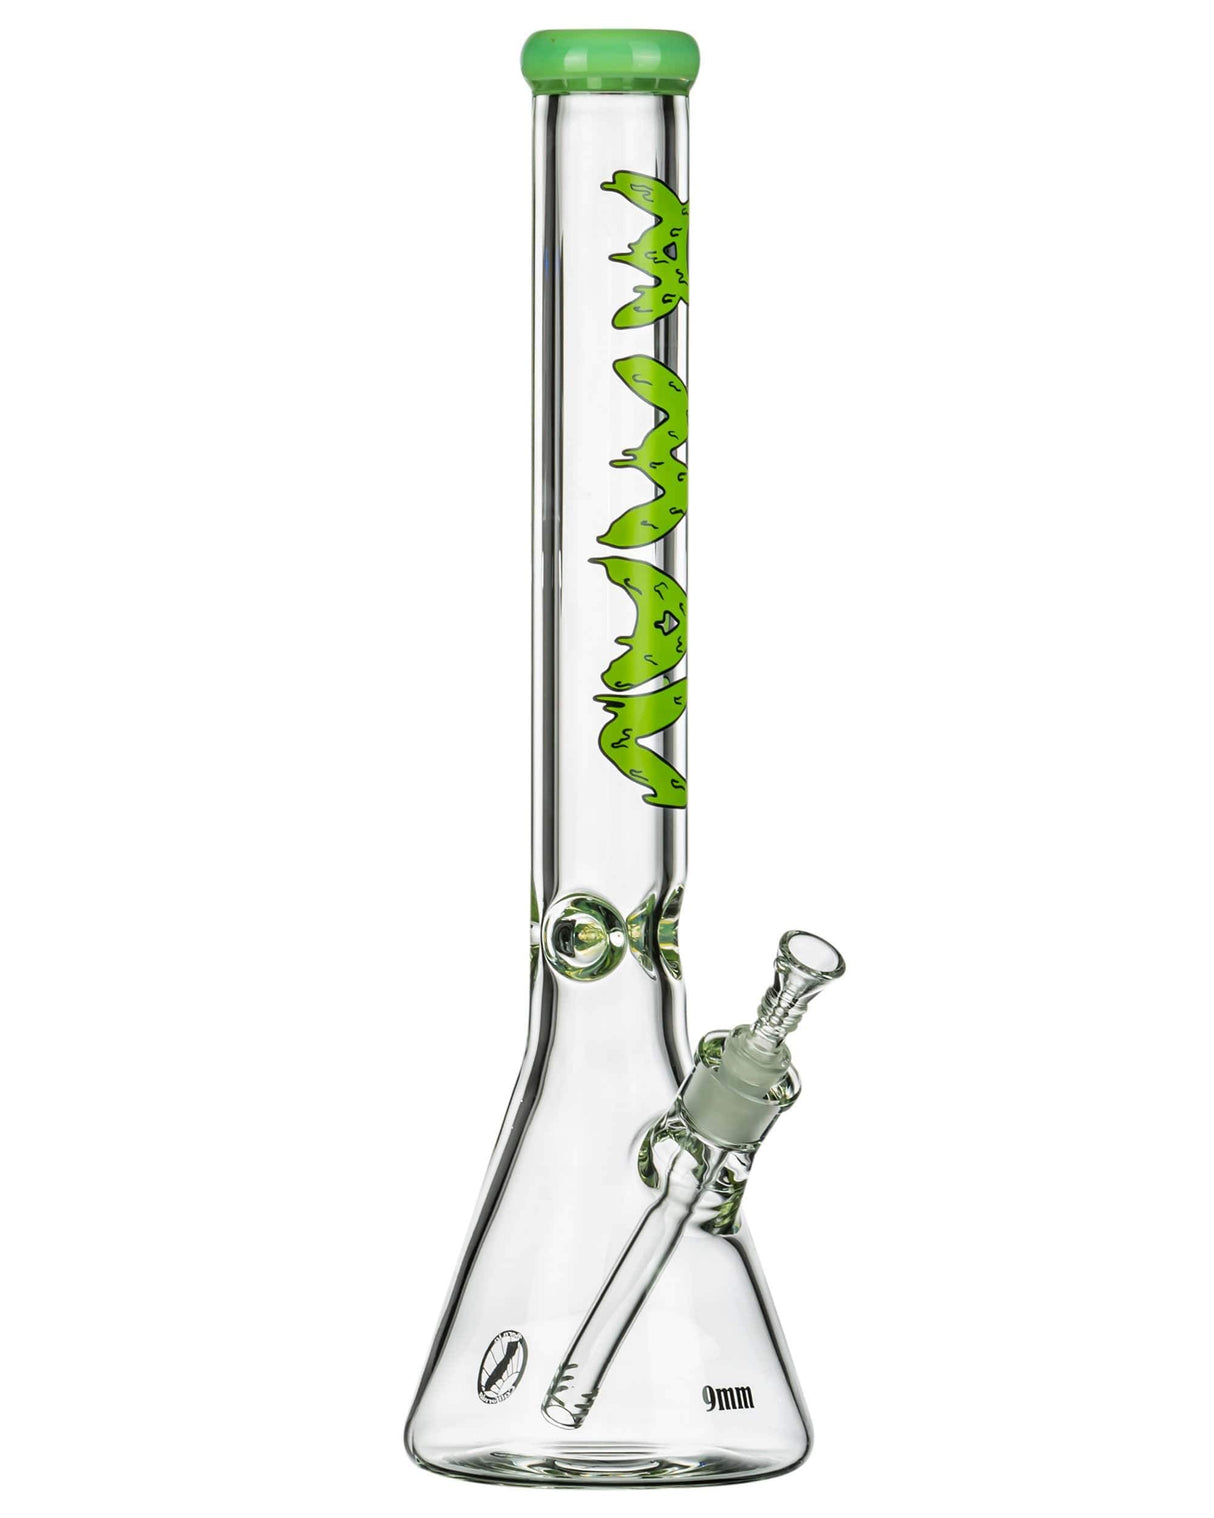 MAV Glass - 18" Special Decal Beaker Bong with 9mm Thick Glass, Front View on White Background